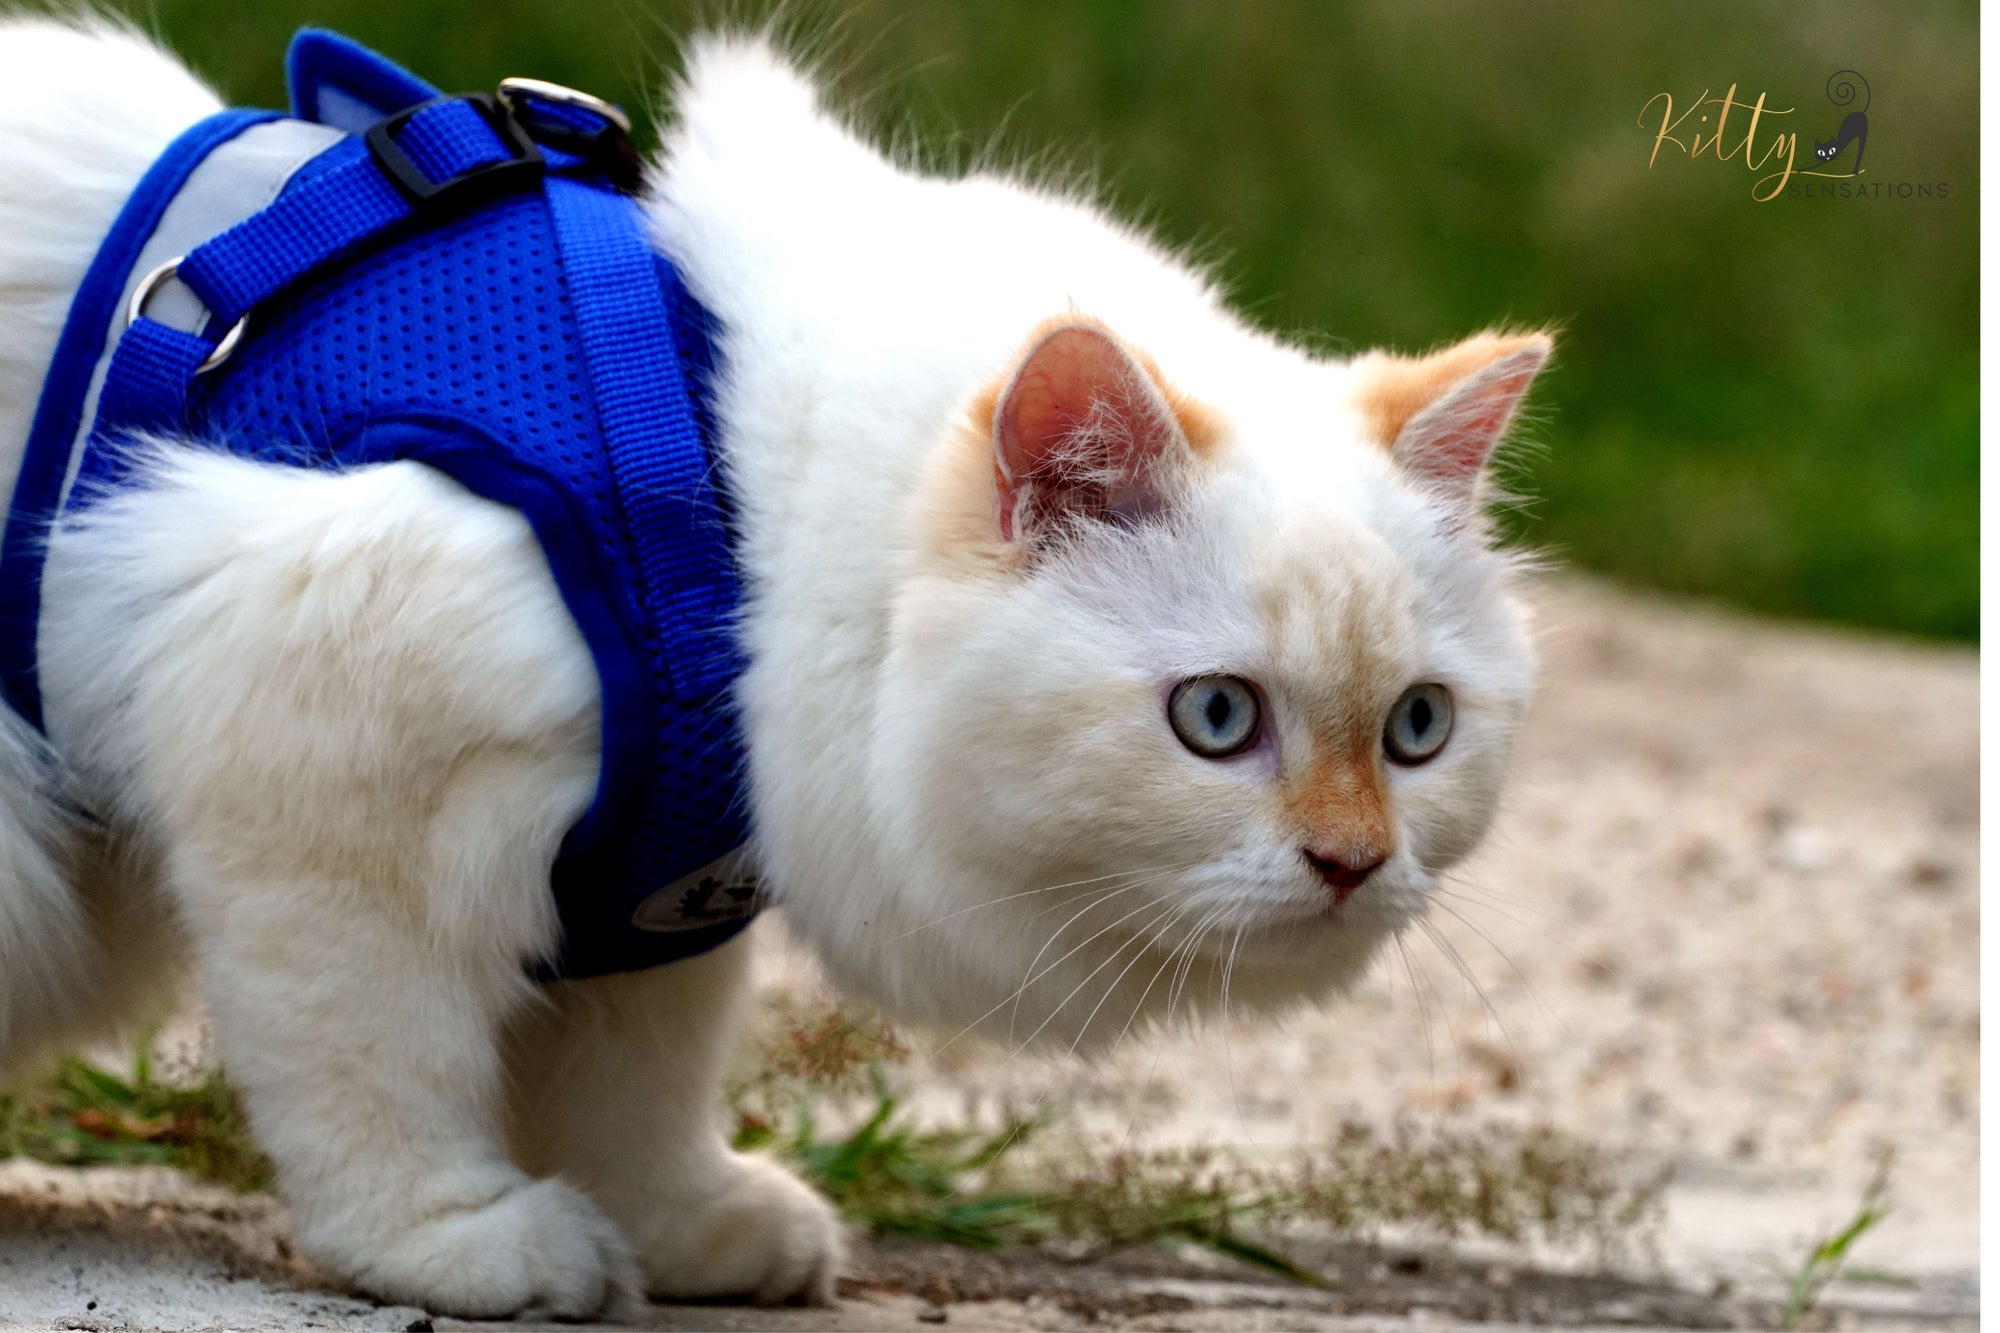 www.KittySensations.com: How to Walk Your Cat on Leash and Harness: What to do Before, During, and After Your Walk: https://www.kittysensations.com/blogs/cat-lifestyle/how-to-walk-you-cat-on-a-leash-and-harness-what-to-do-before-during-and-after-your-walk